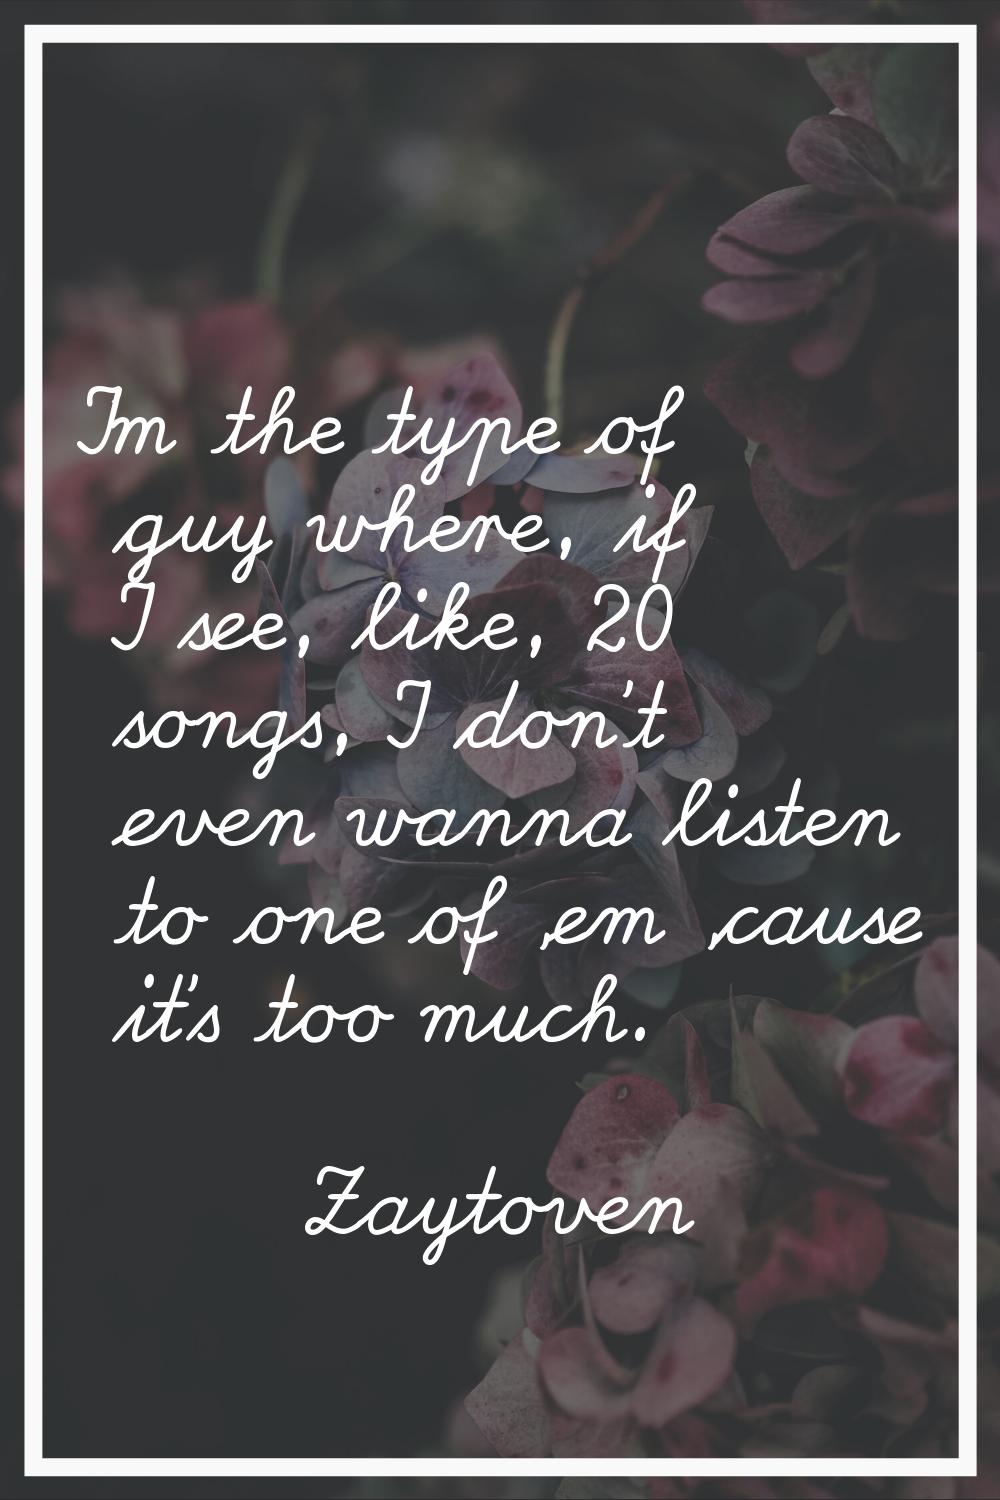 I'm the type of guy where, if I see, like, 20 songs, I don't even wanna listen to one of 'em 'cause